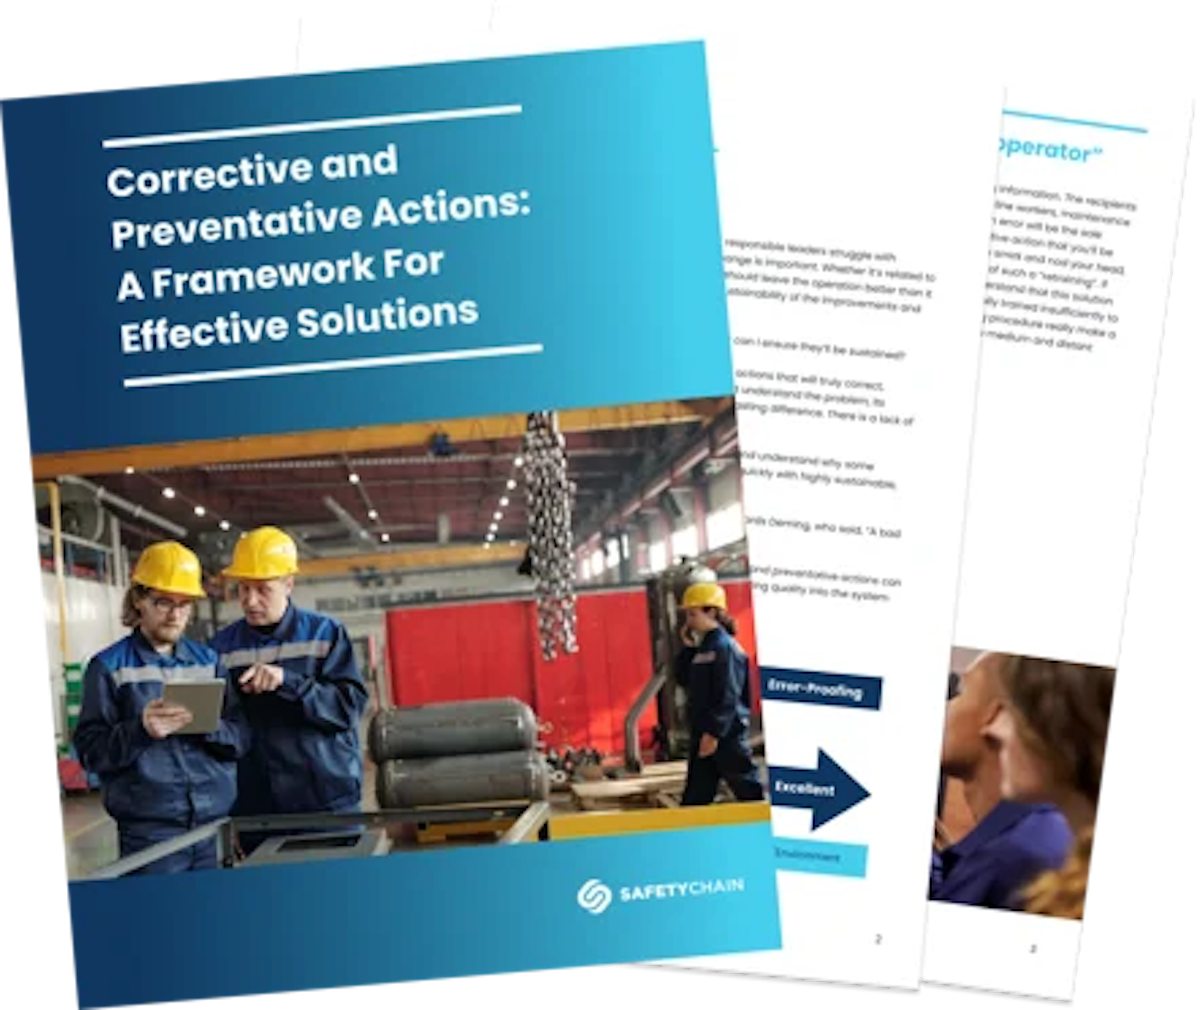 Corrective and Preventative Actions: A Framework For Effective Solutions